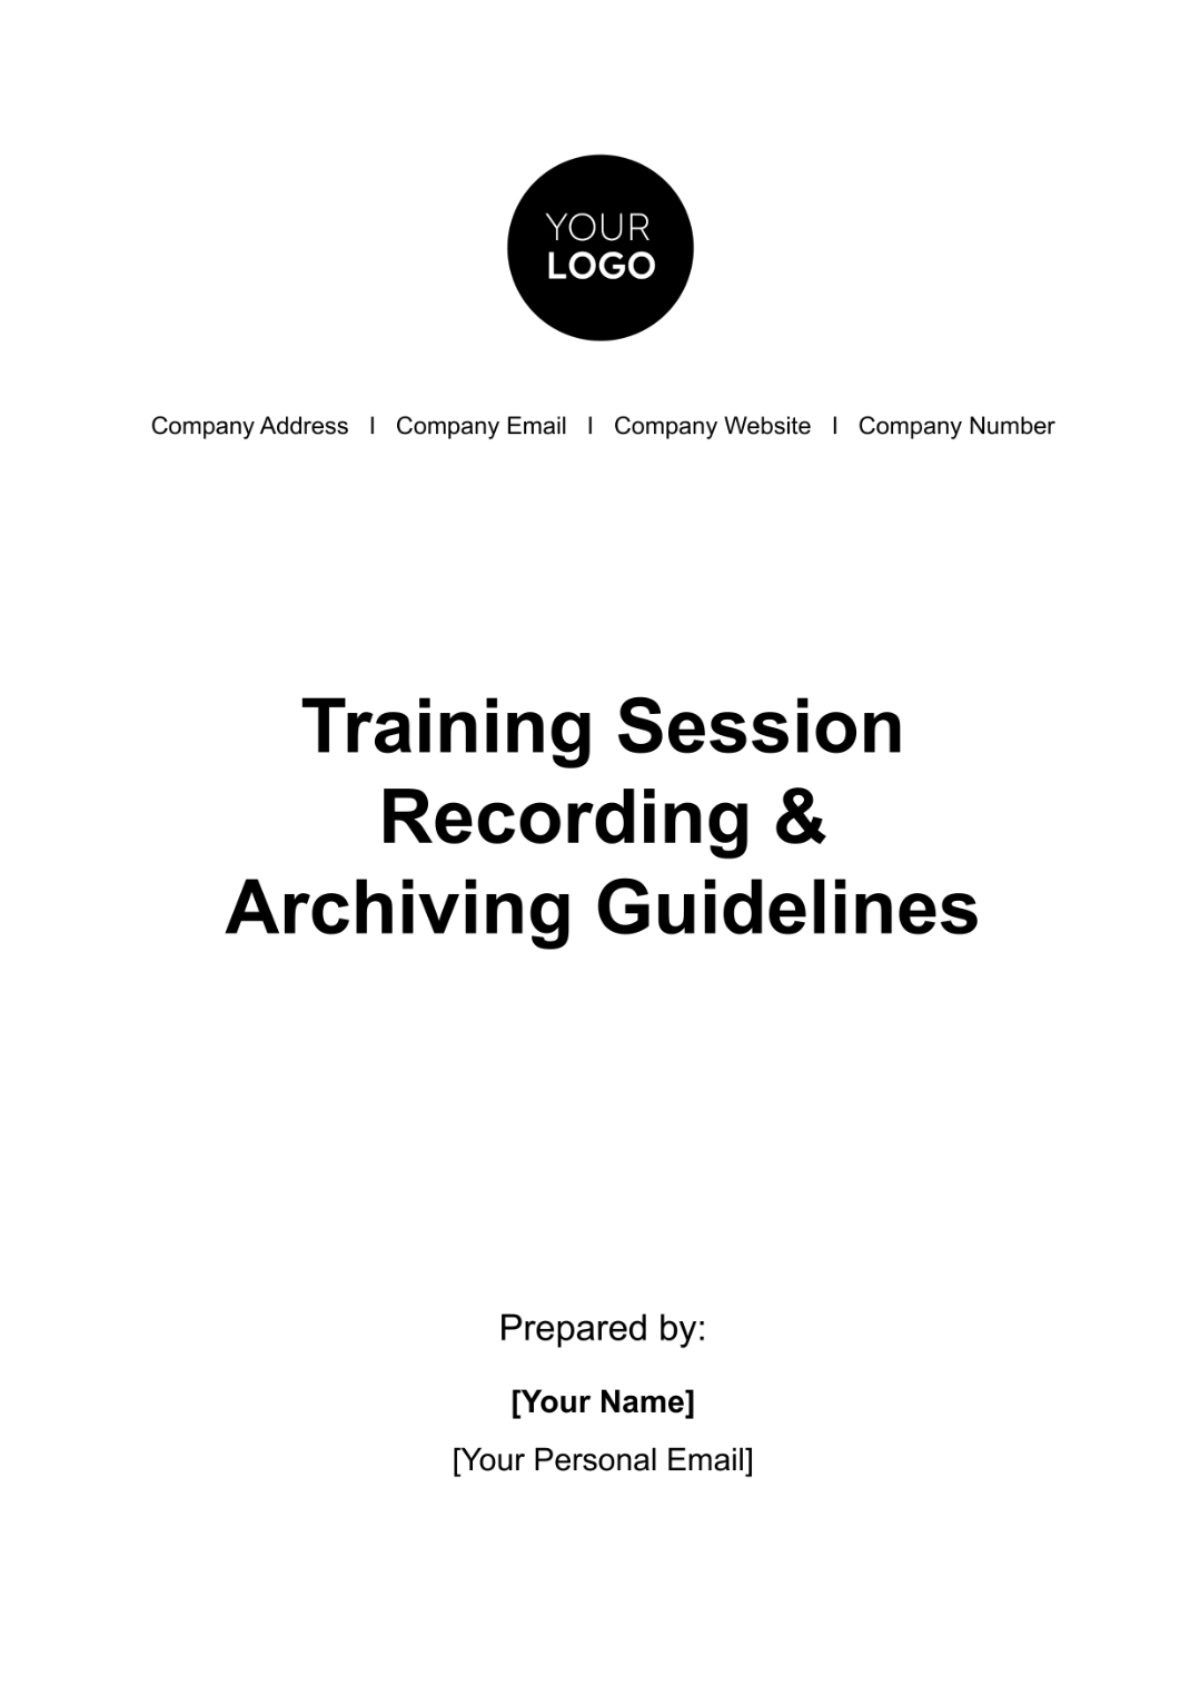 Free Training Session Recording & Archiving Guidelines HR Template